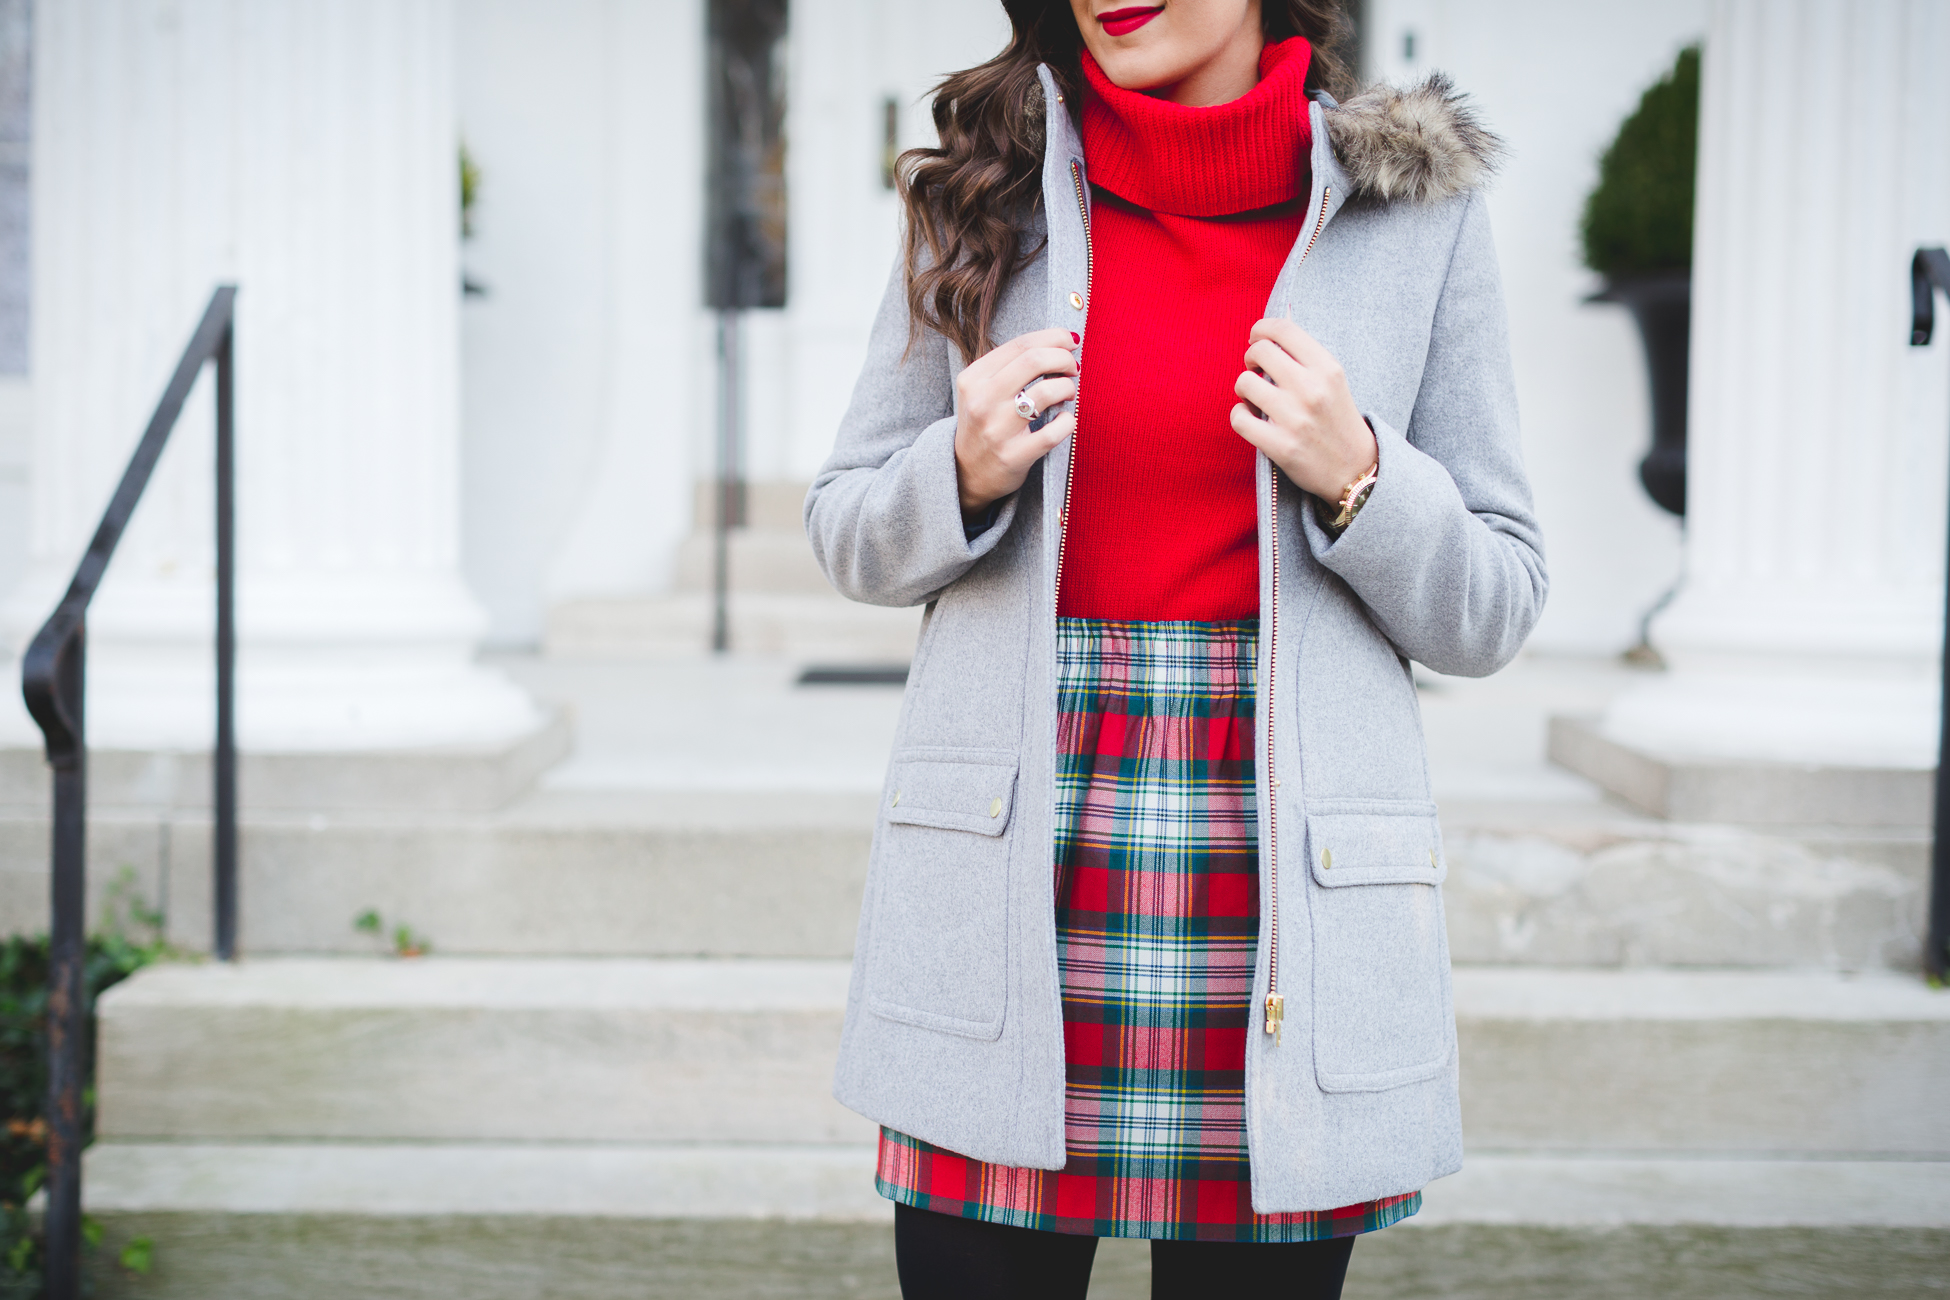 red turtleneck, plaid skirt, j.crew factory holiday, j.crew vail parka, holiday outfit ideas, holiday sales, holiday look, preppy holiday outfit ideas // grace wainwright from a southern drawl